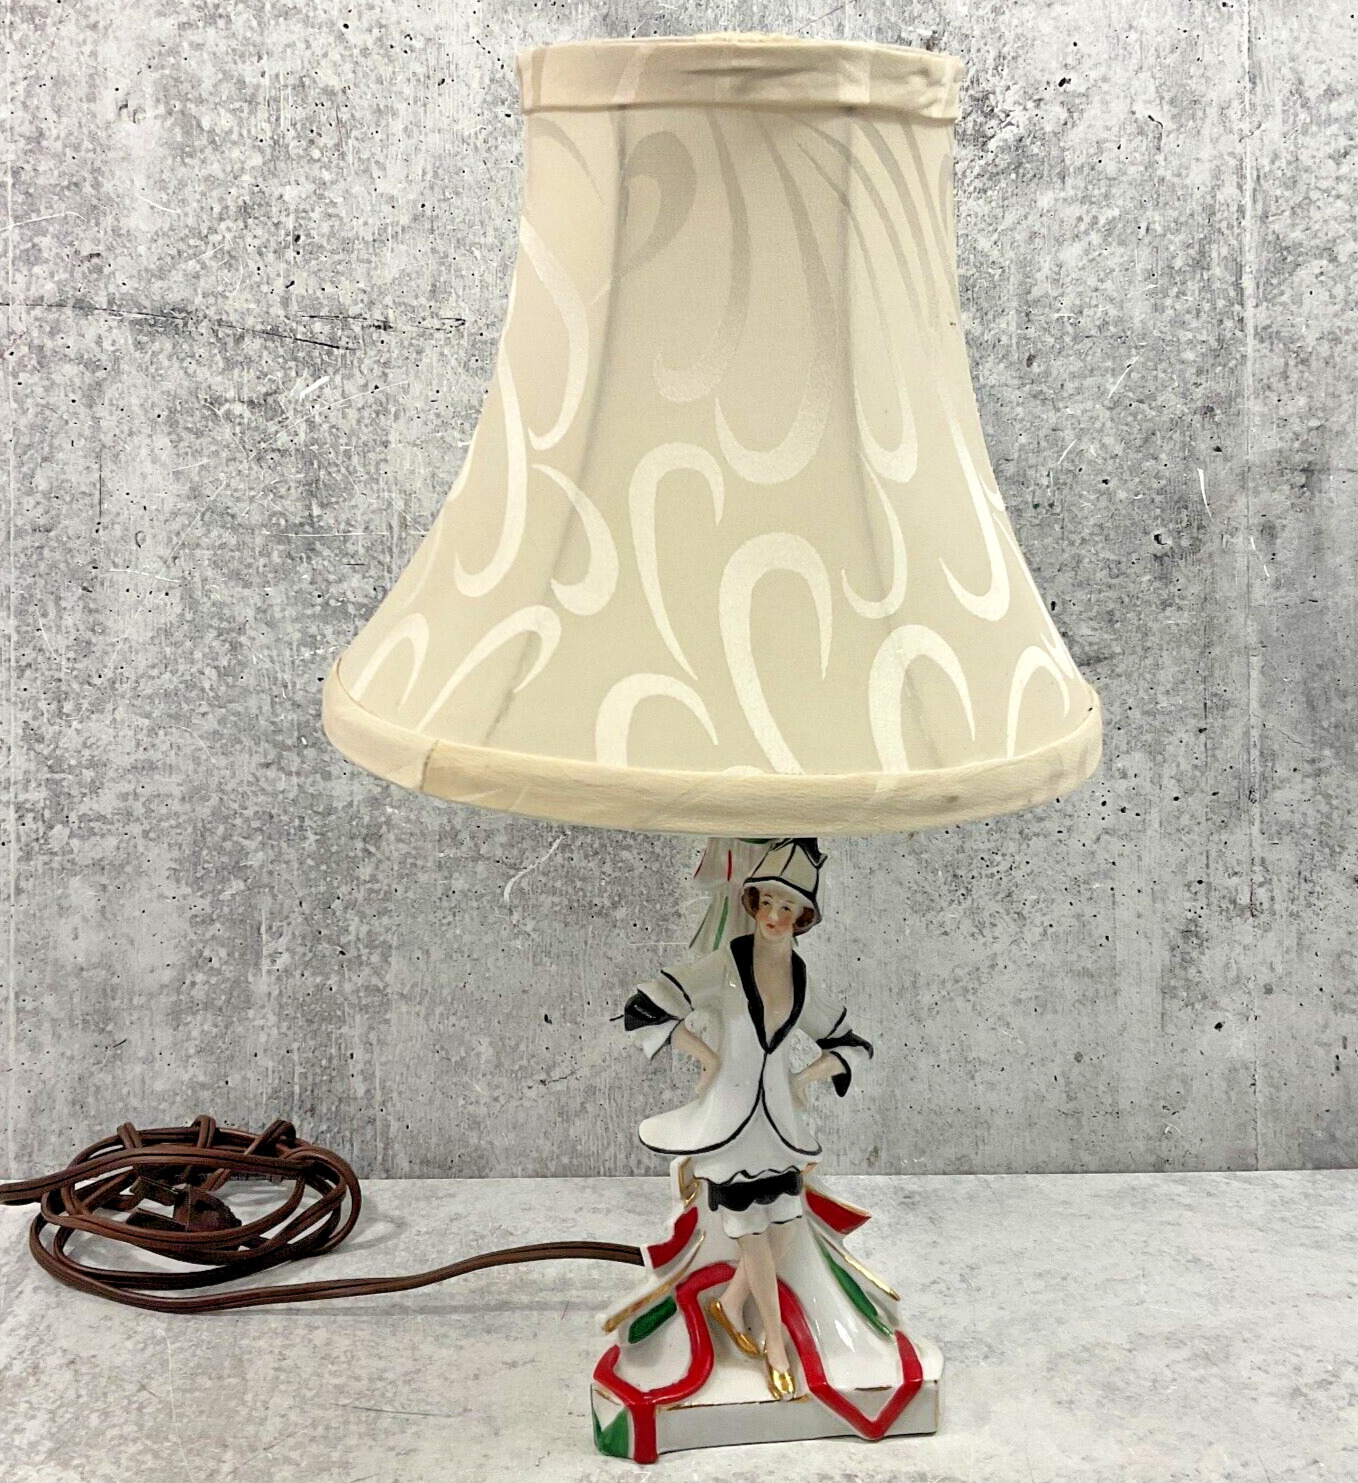 Antique c1920s Pre WWII German Porcelain Lamp Art Deco Style Ceramic Bell Shade